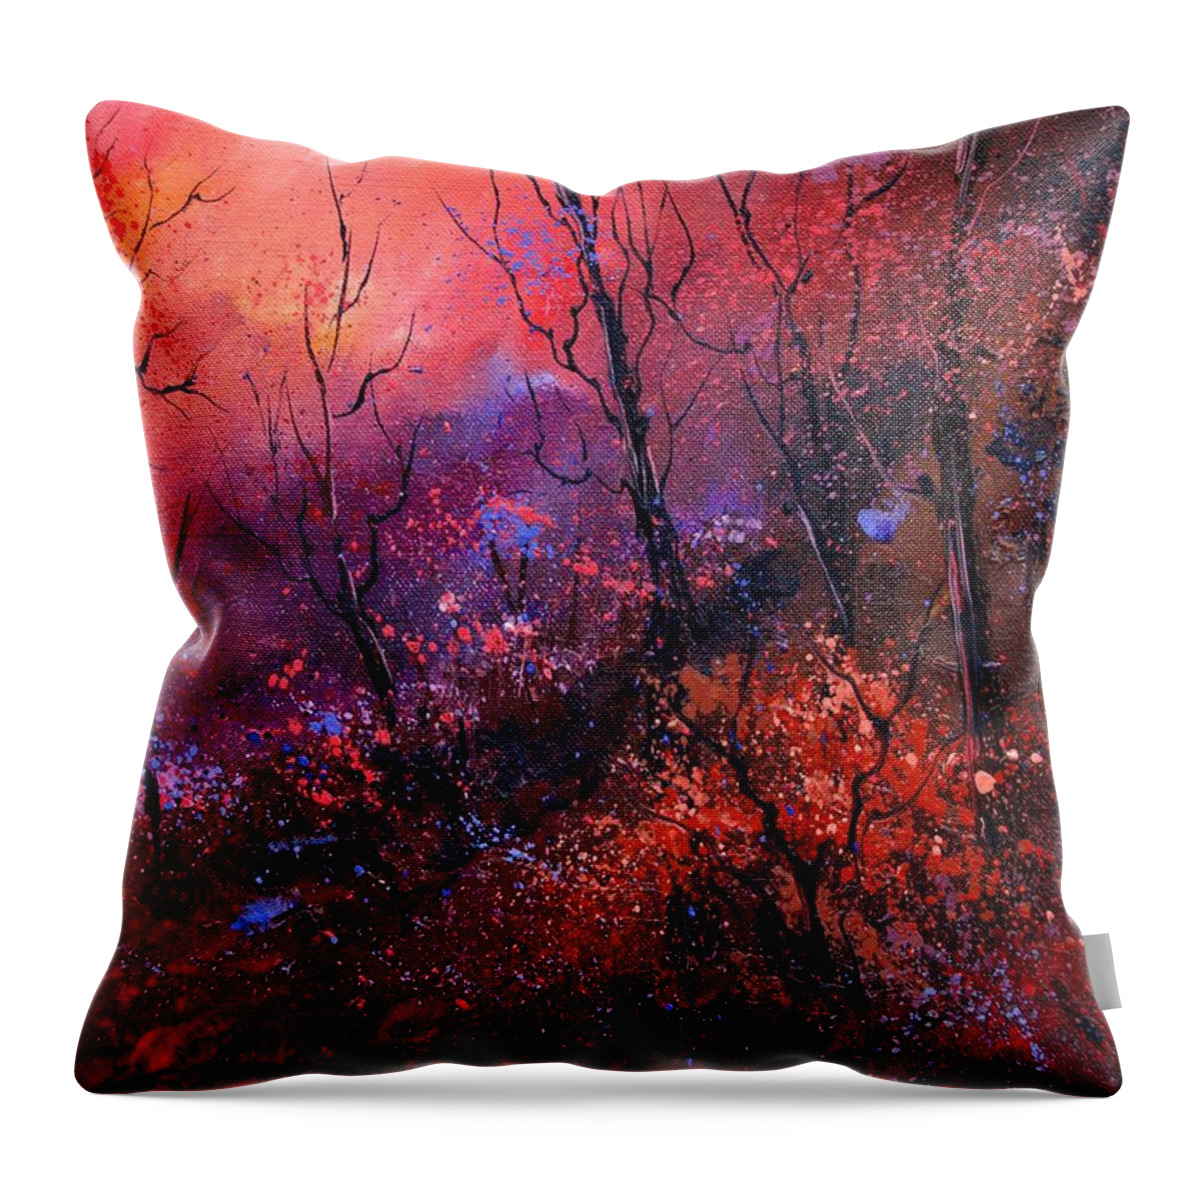 Wood Sunset Tree Throw Pillow featuring the painting Unset In The Wood by Pol Ledent